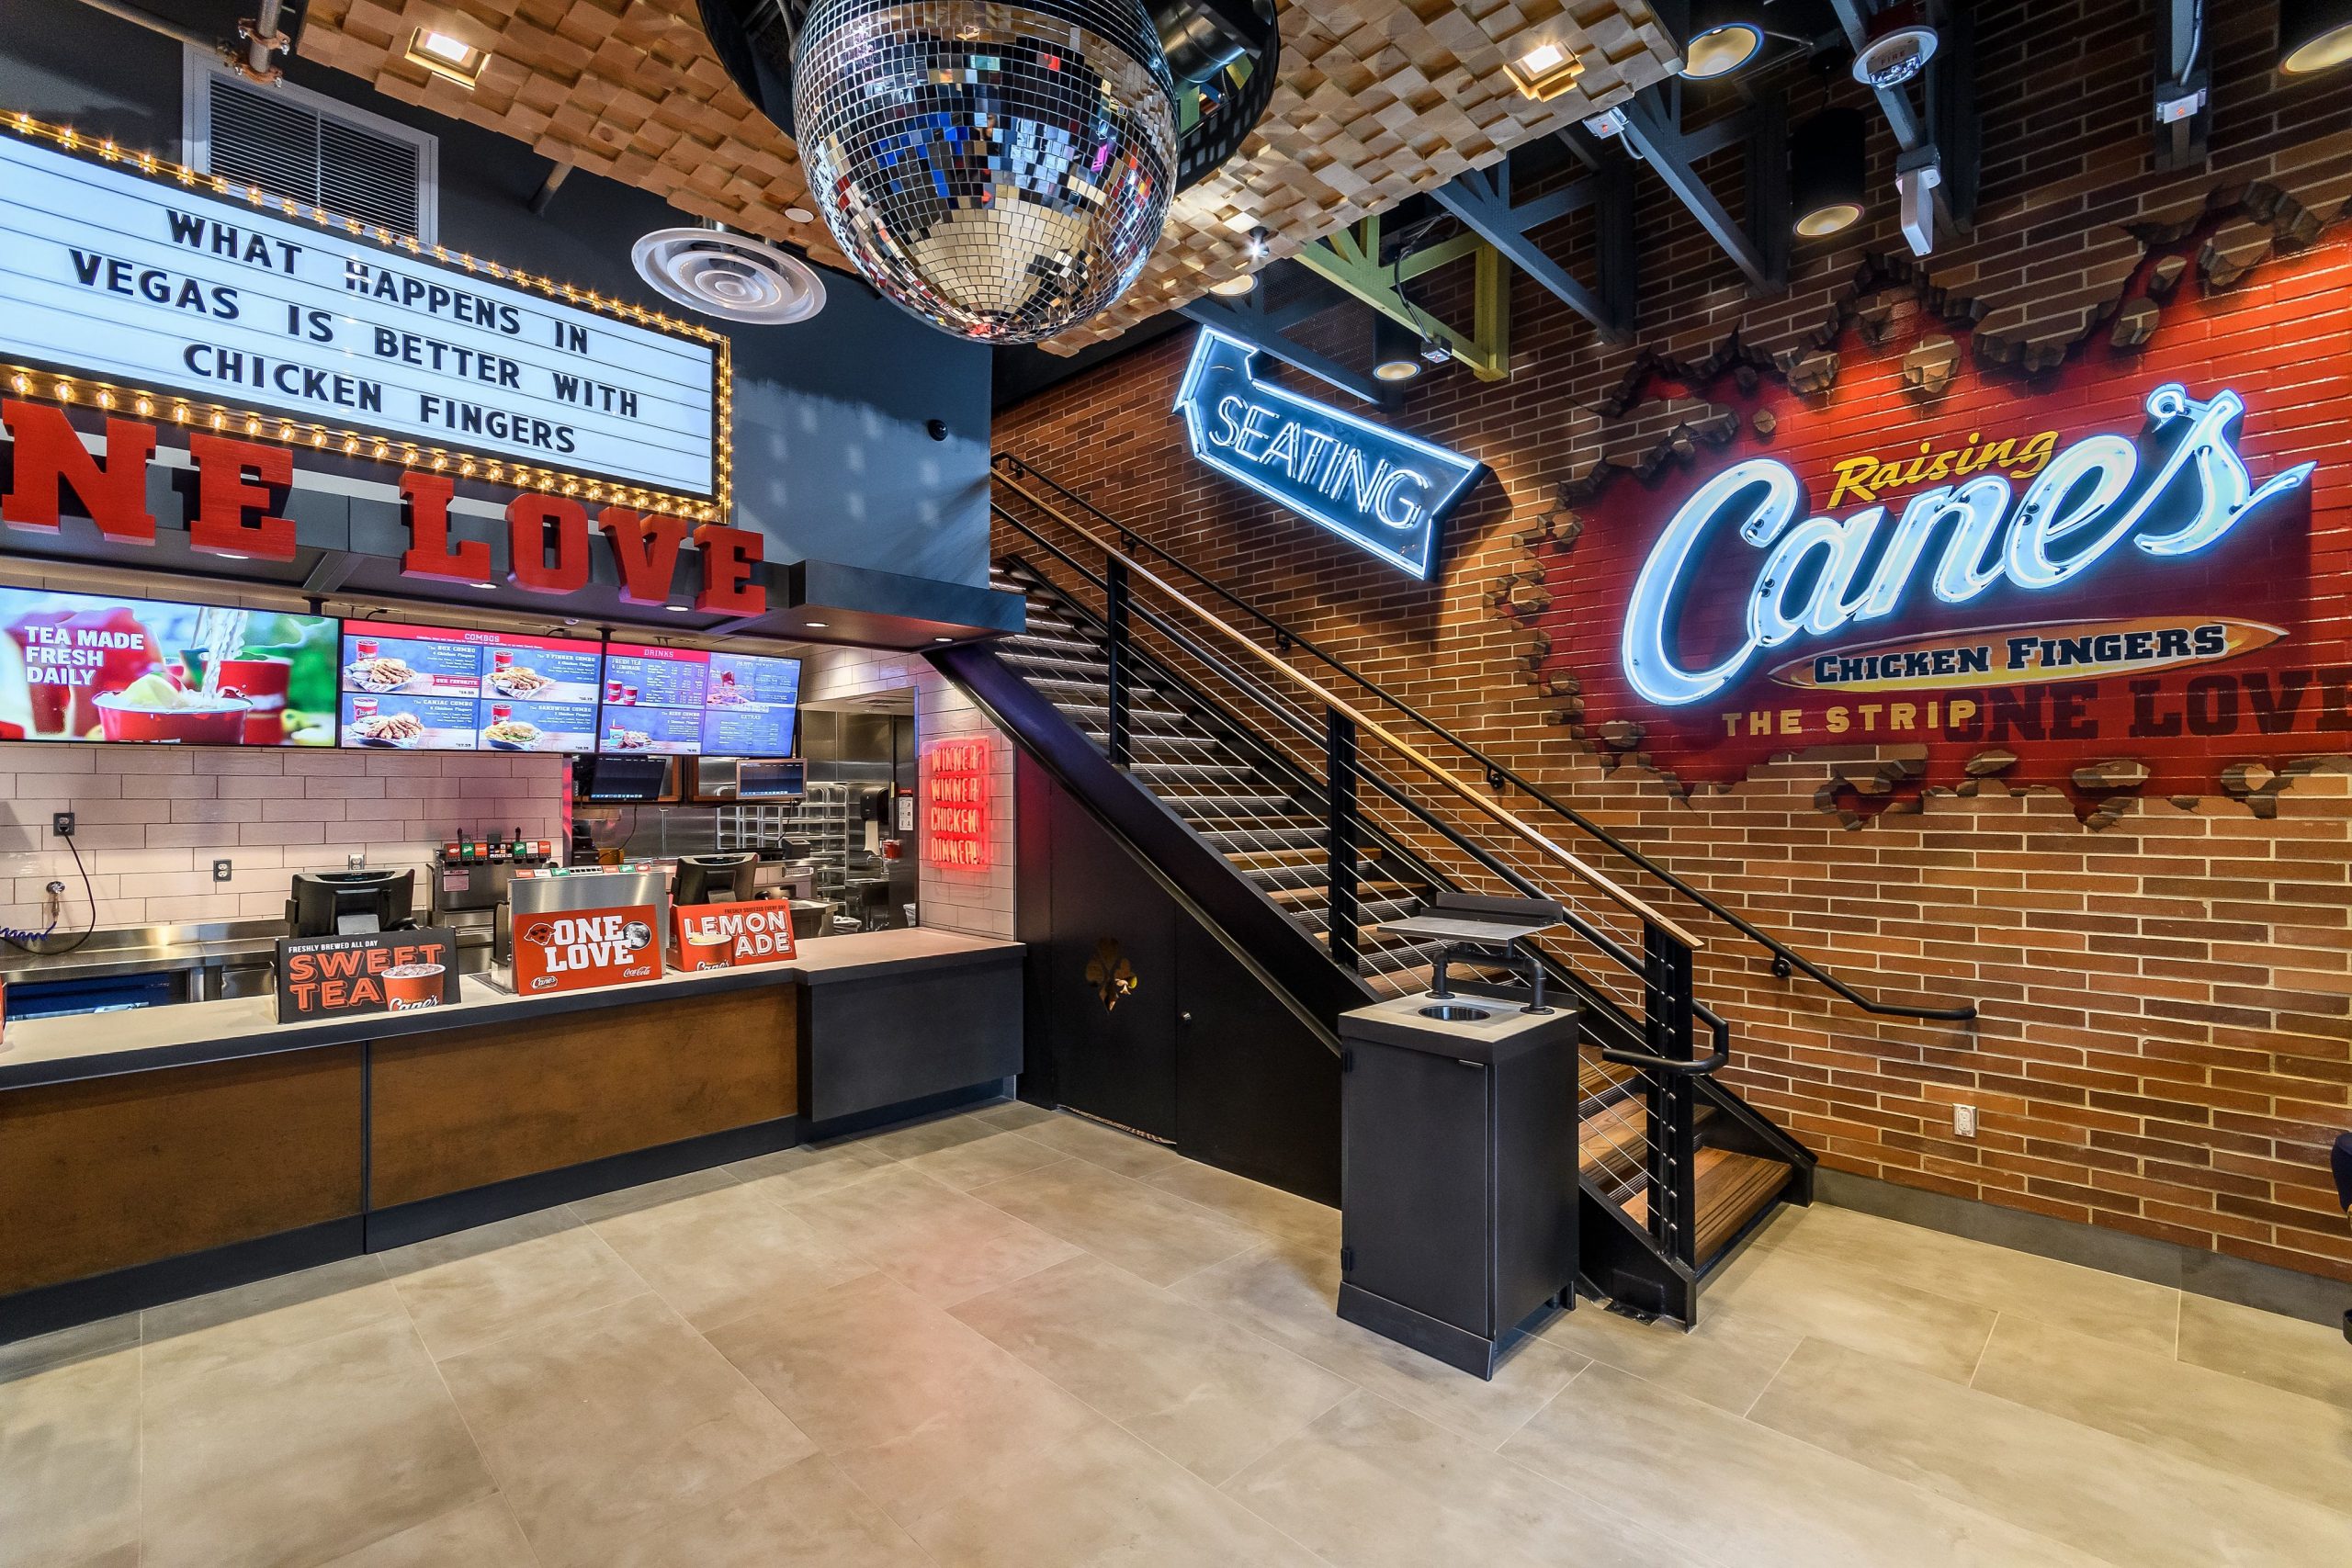 Mega Millions lottery 2022: What are Raising Cane’s chances of winning